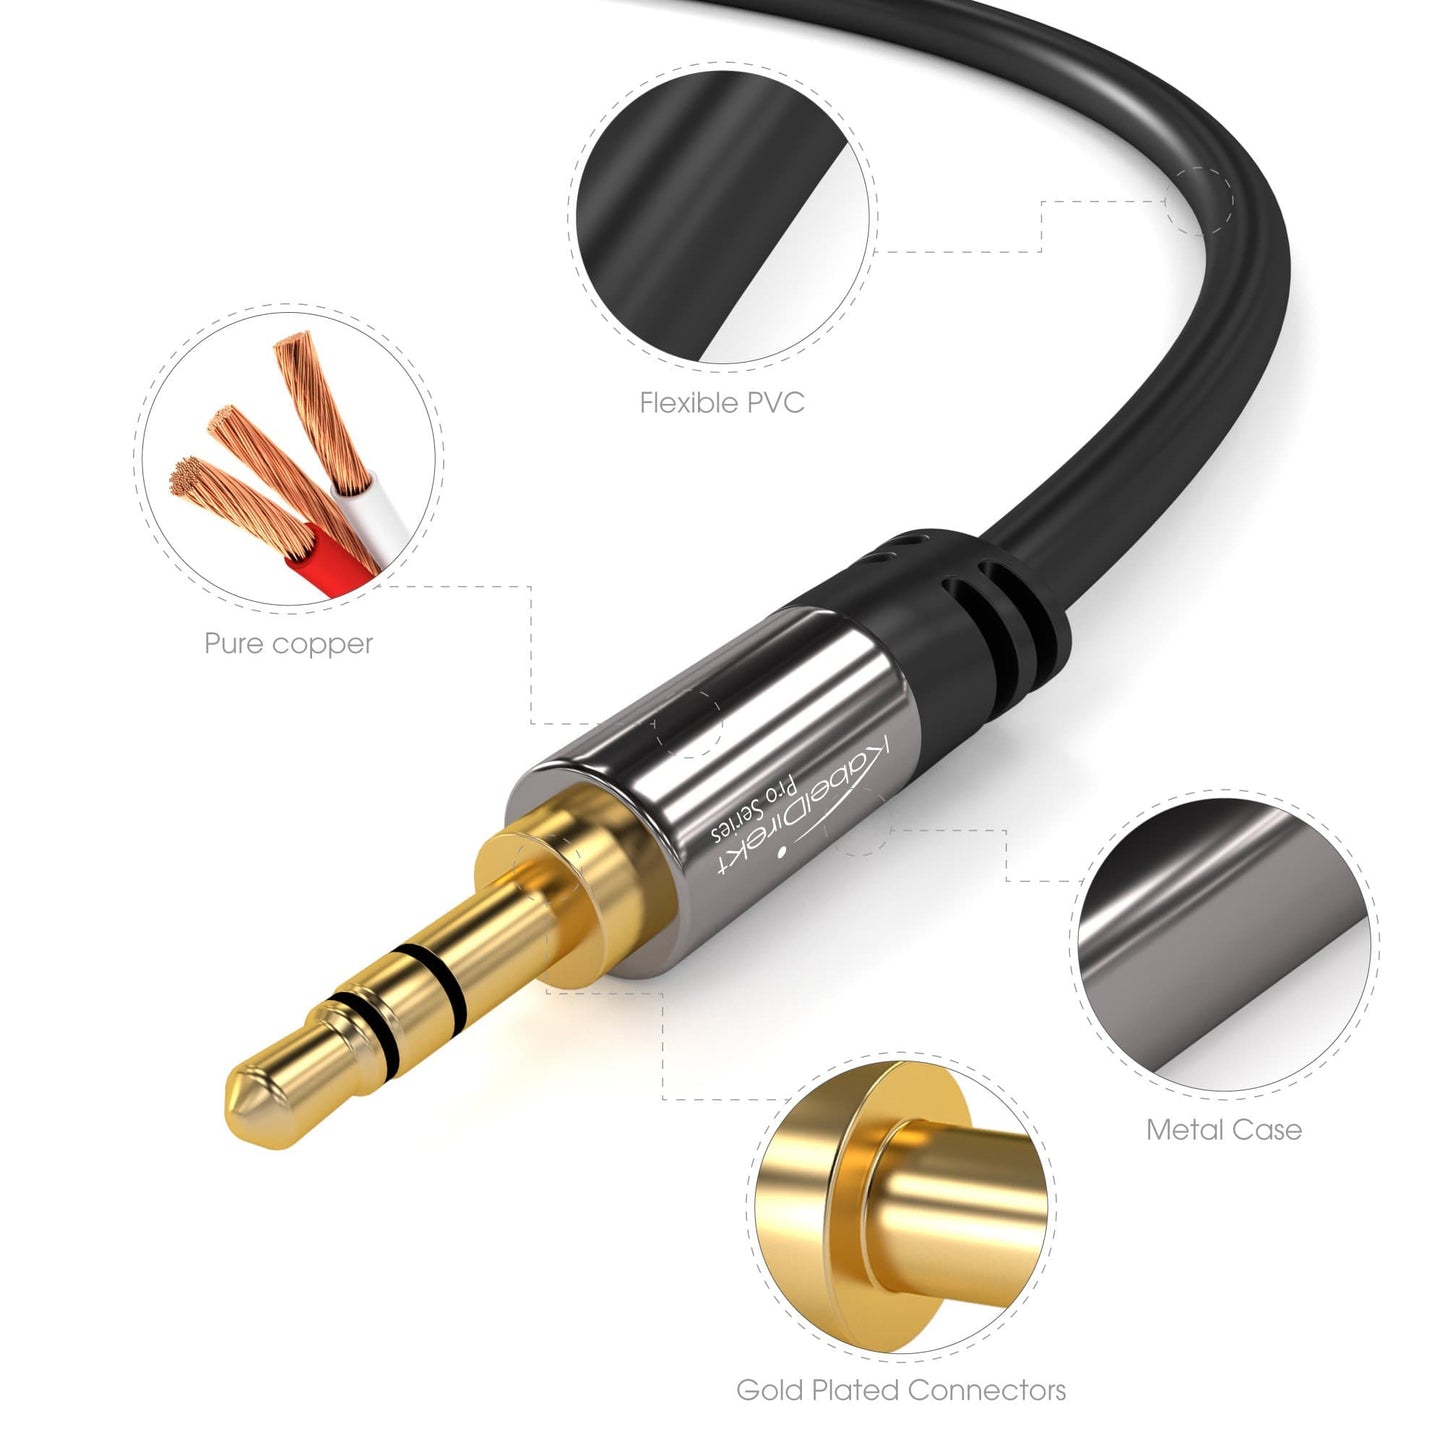 AUX audio & jack cable - designed to be indestructible & ideally suited for iPhones, iPads, smartphones, cars - black